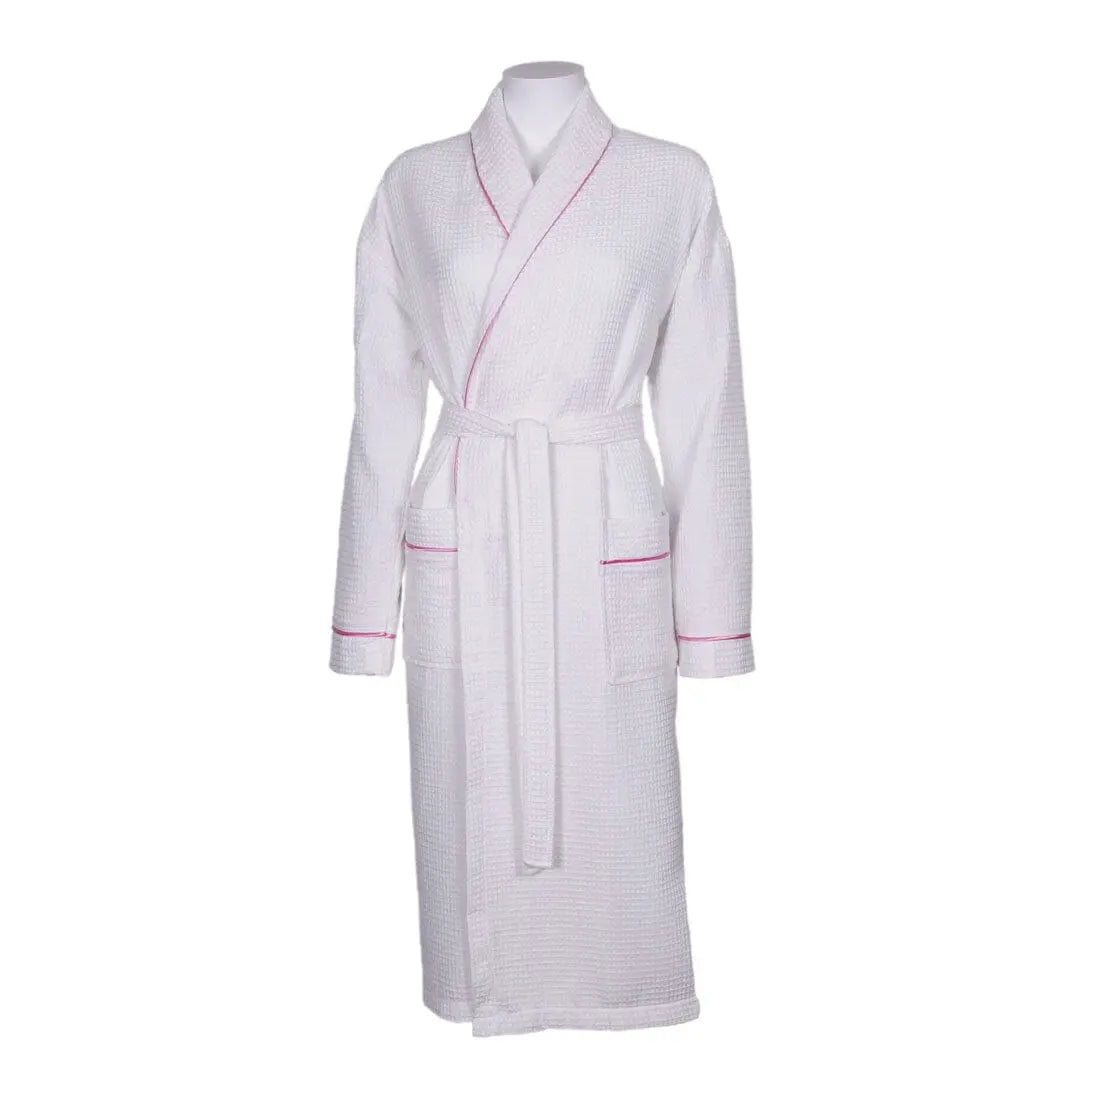 white with pink piping robe